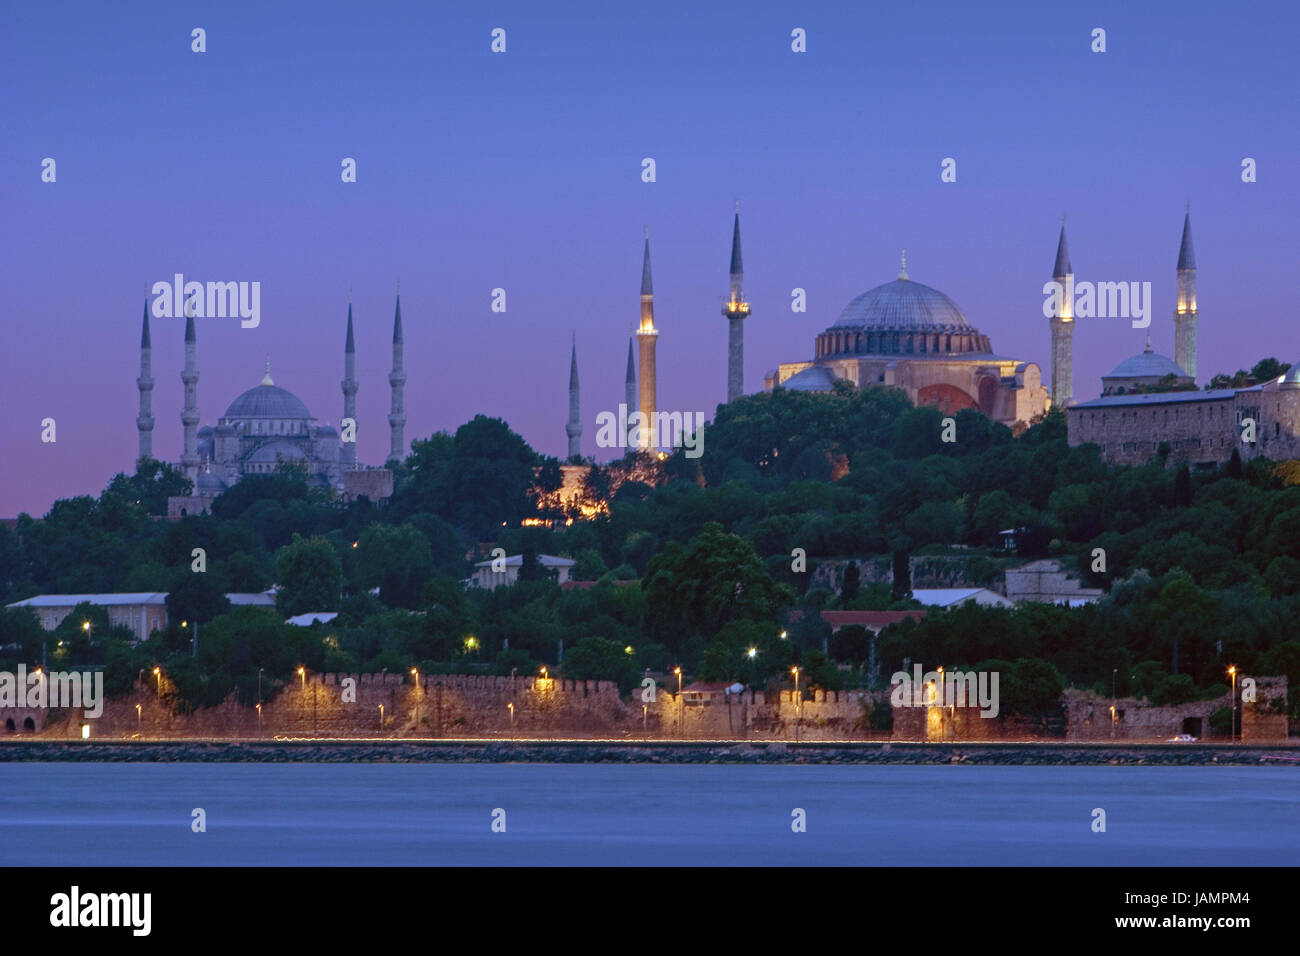 Turkey,Istanbul,town view,blue mosque,Hagia Sophia,lighting,evening,city,metropolis,port,culture,tourism,place of interest,structures,architecture,landmark,faith,religion,Islam,church,sacred construction,museum,dome,minarets,sea,lights,evening tuning, Stock Photo